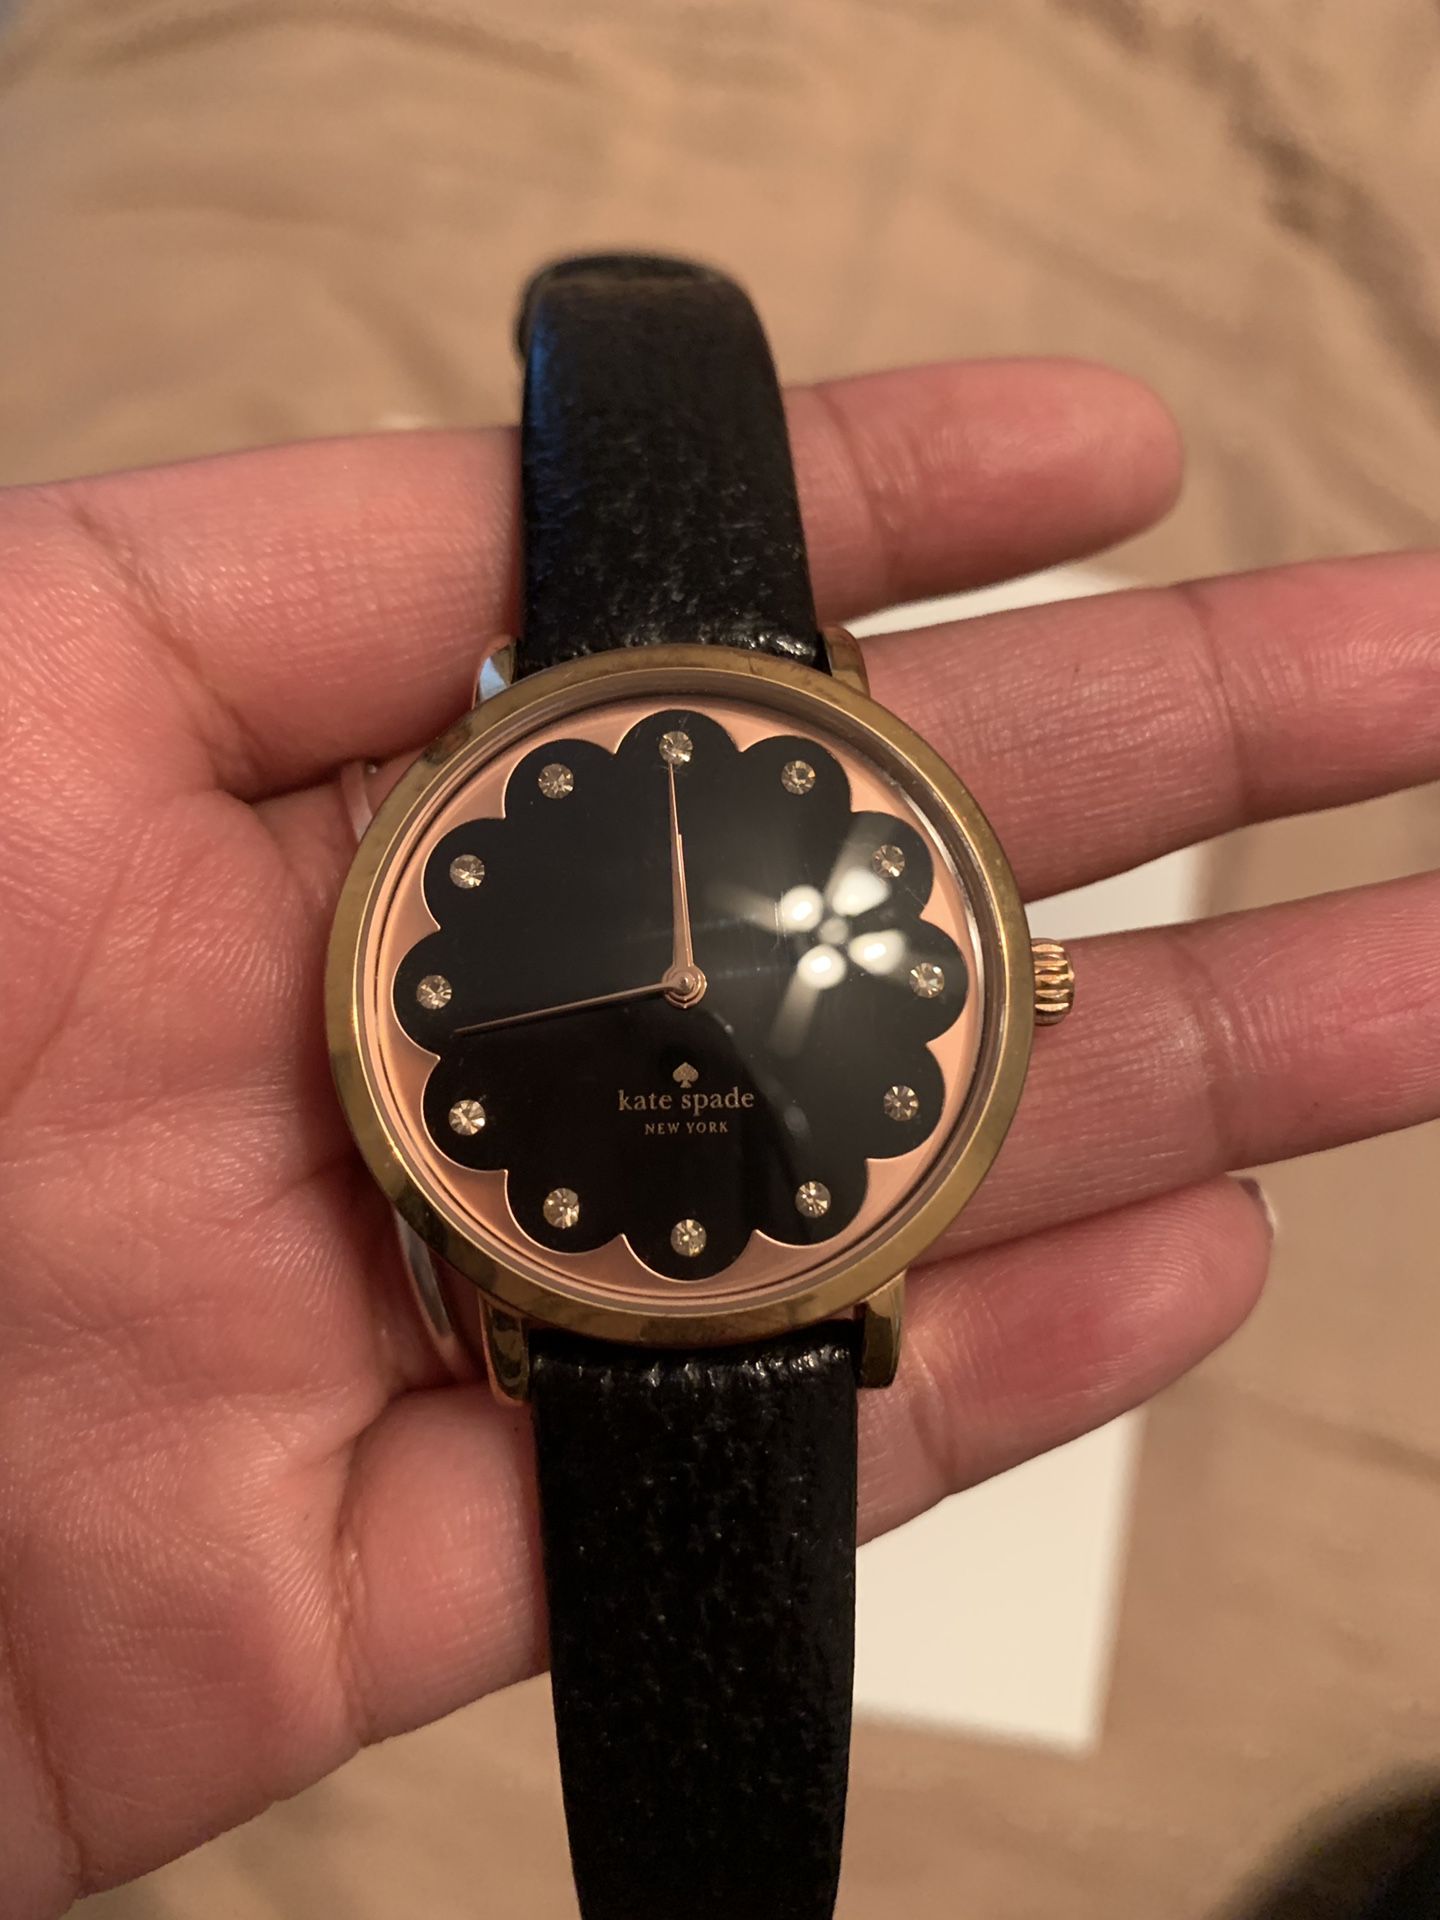 Kate spade rose gold and black leather watch